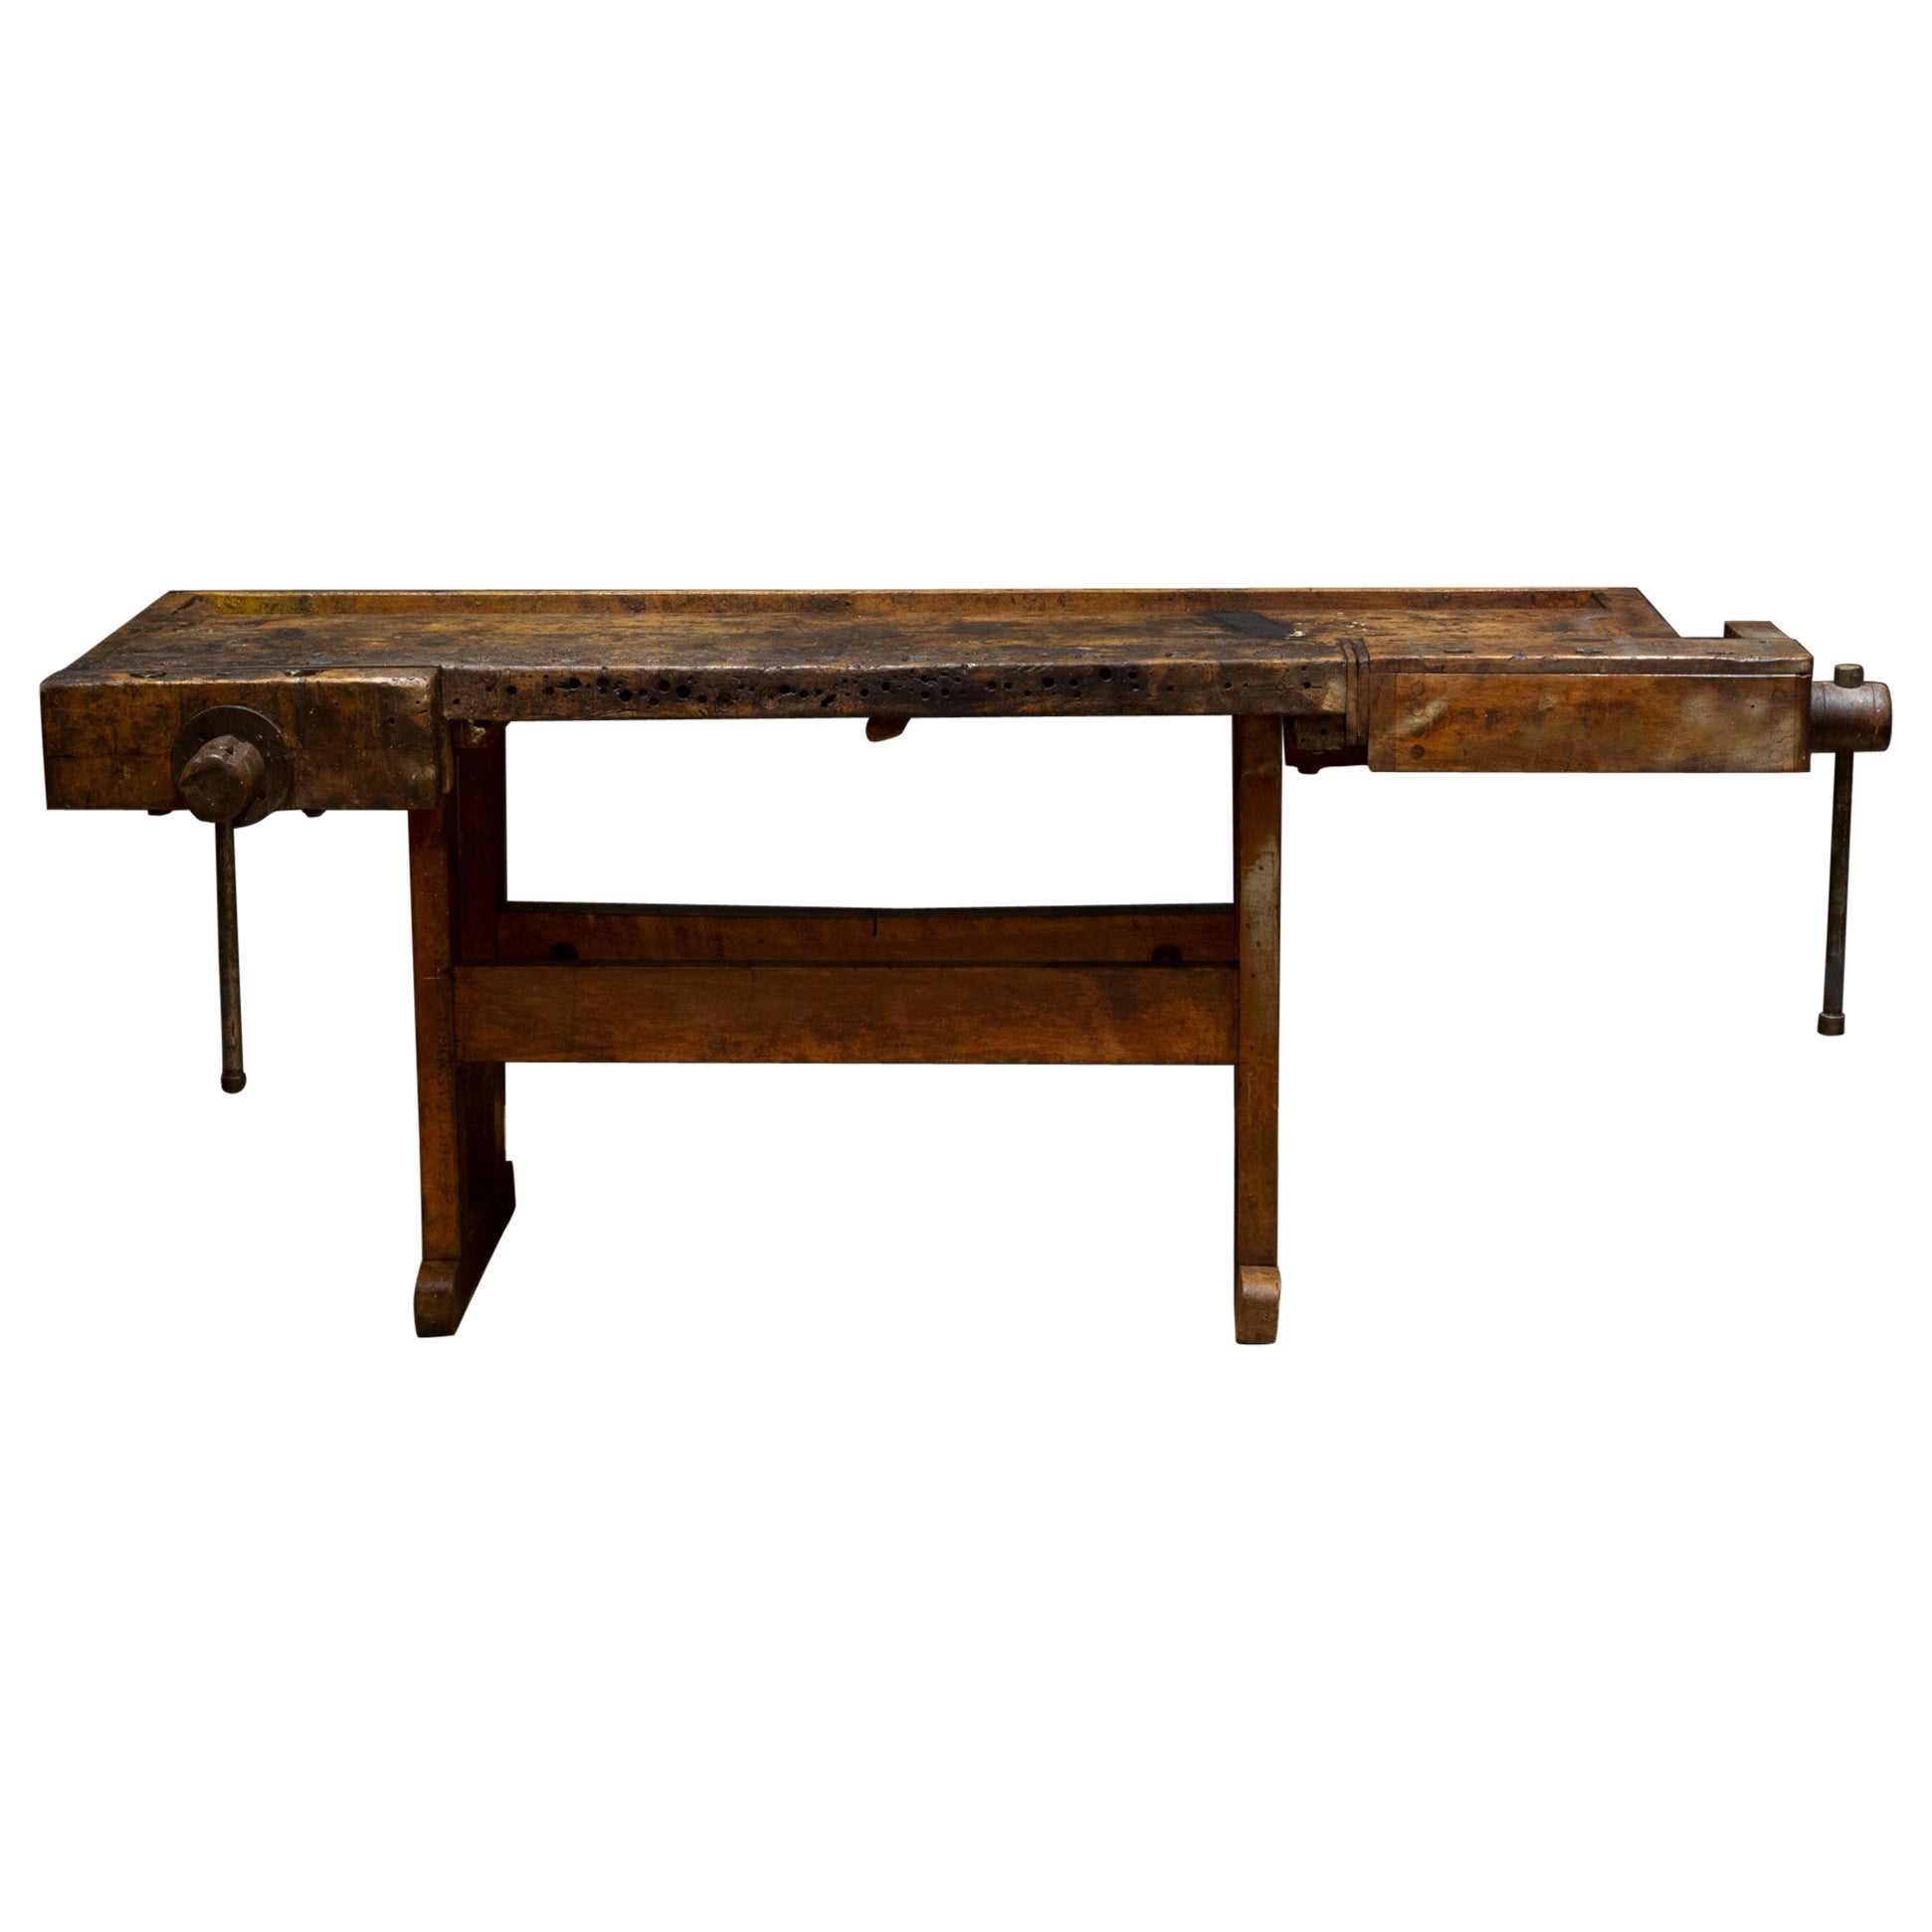 Late 19th/Early 20th c. Carpenter's Workbench c.1880-1920 For Sale